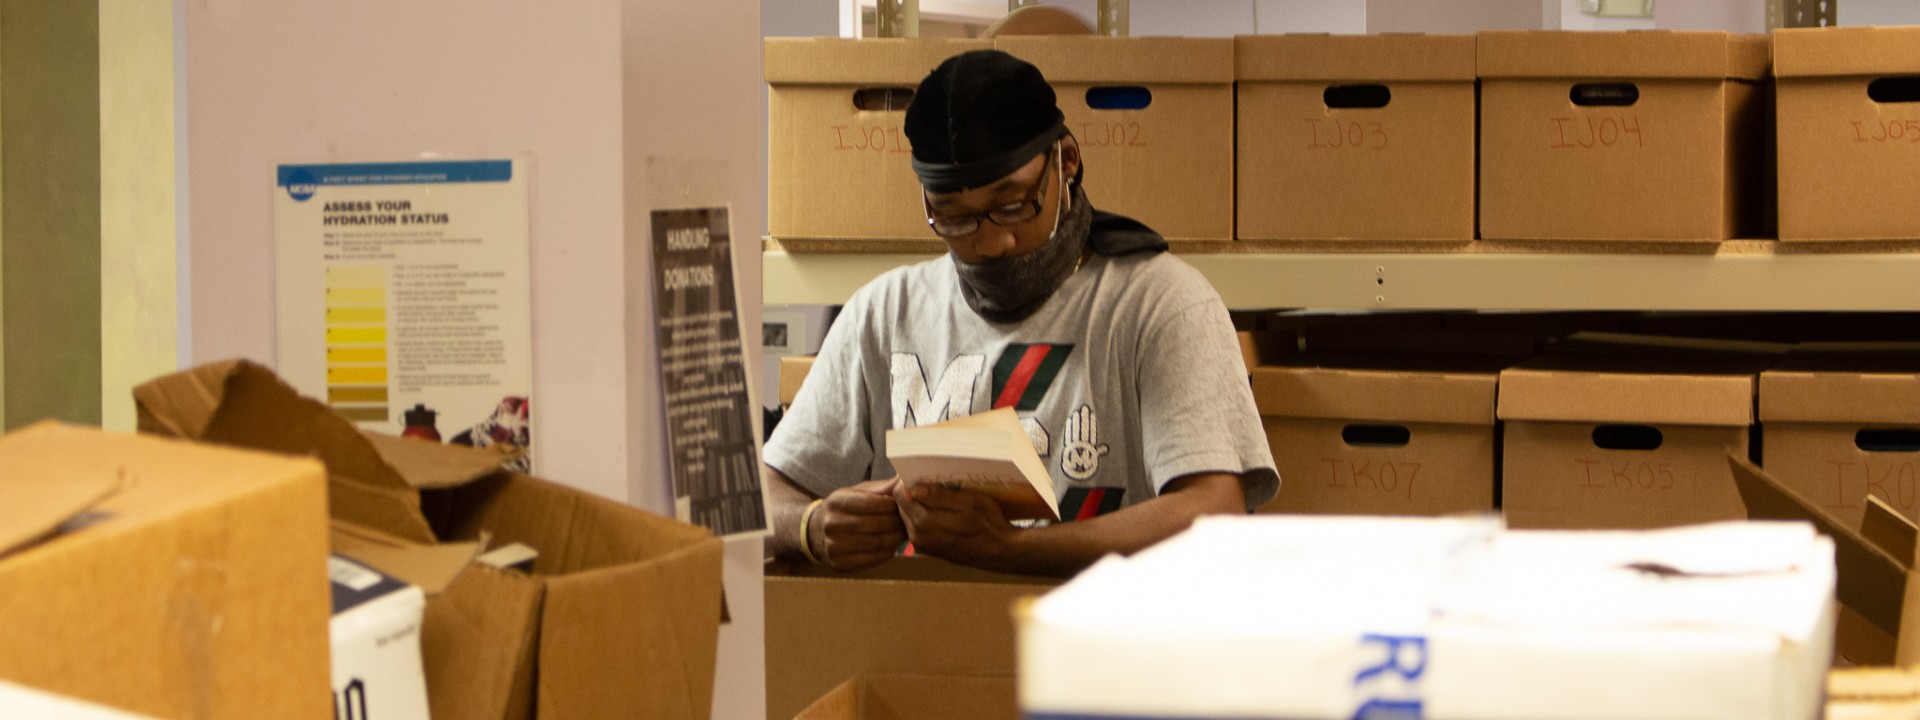 Project HOME staffer sorting books